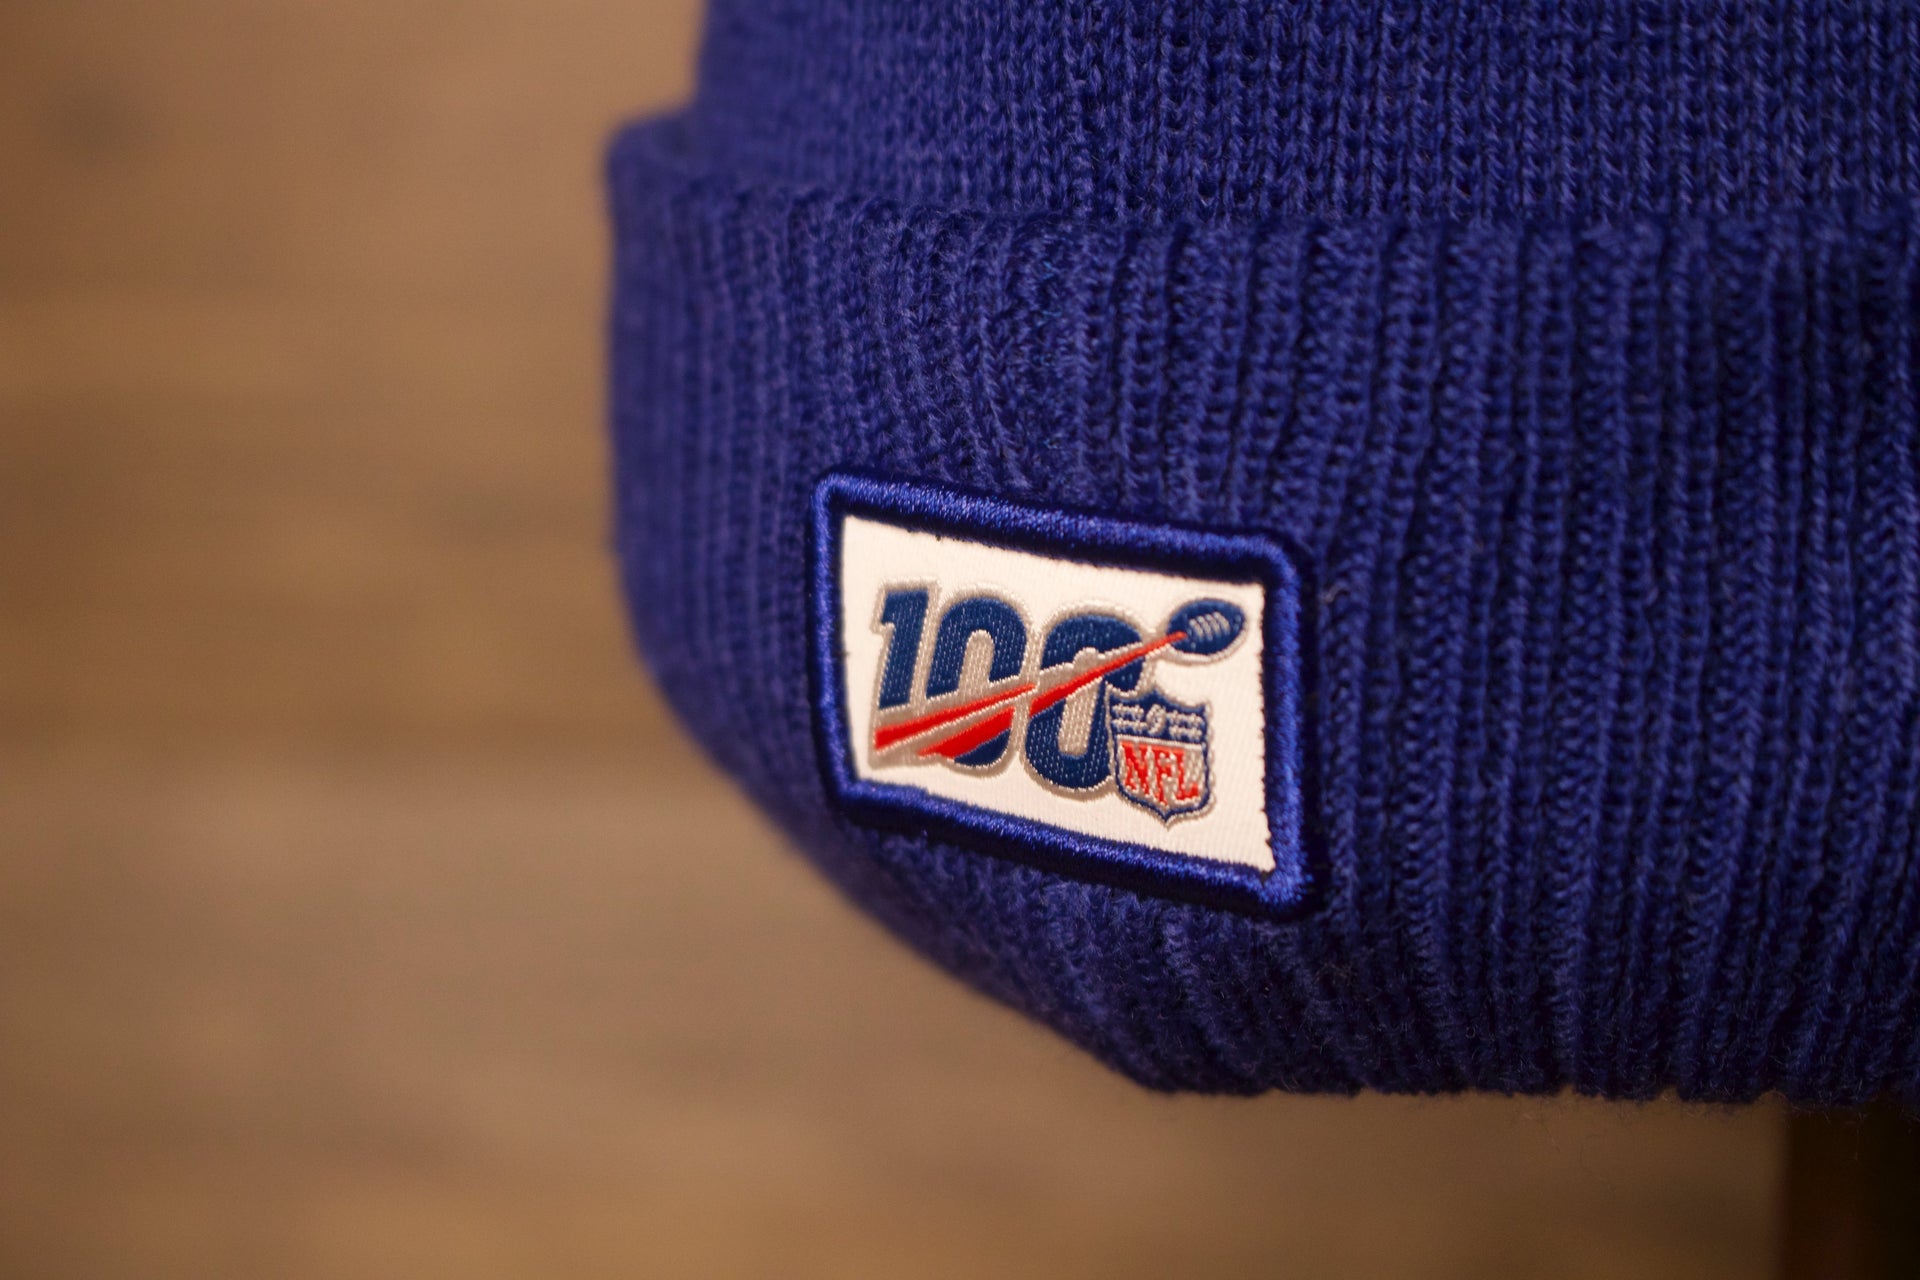 Giants Beanie | New York Giants 2019 On-Field Beanie | Giants Blue Winter Hat  the nfl patch is on the back with a white background